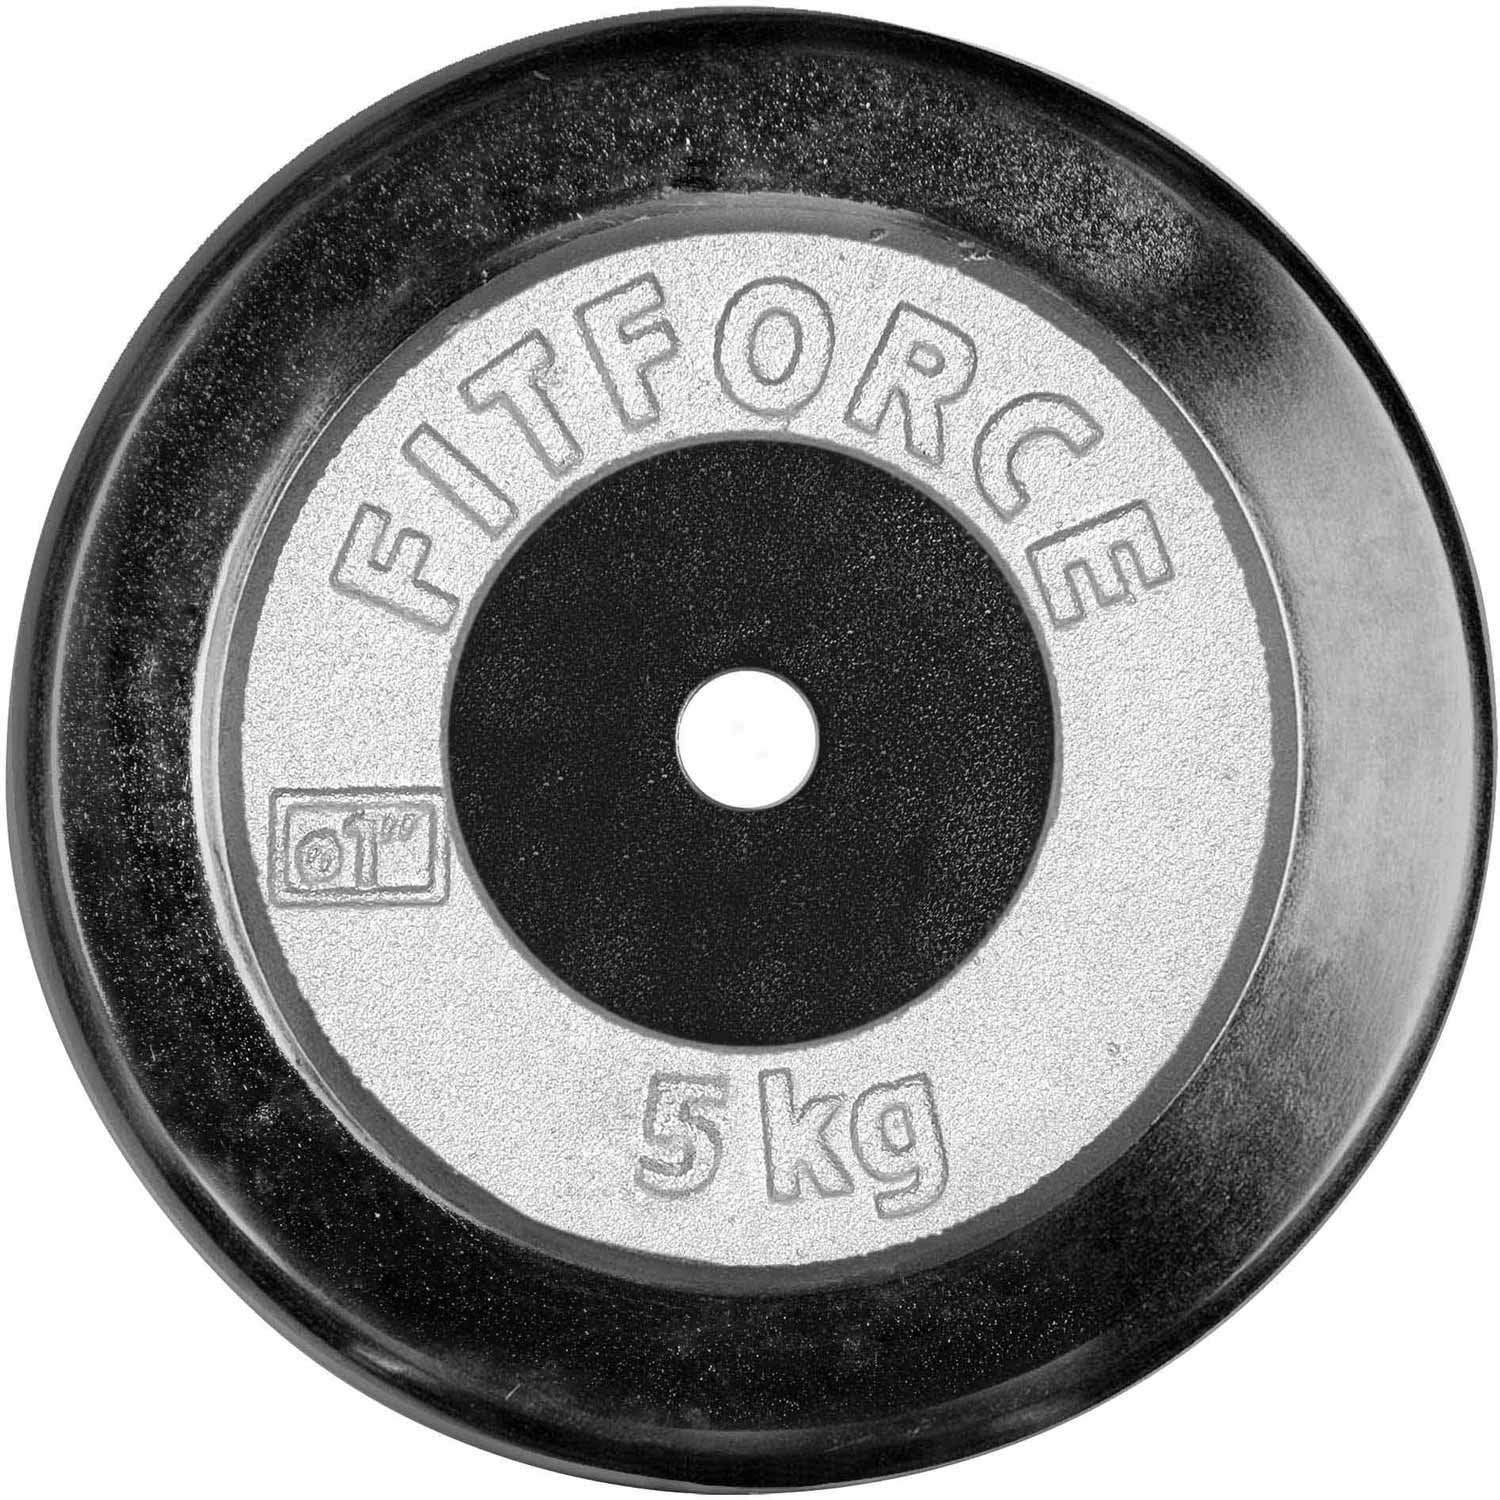 WEIGHT DISC PLATE 5KG CHROME - Weight Disc Plate